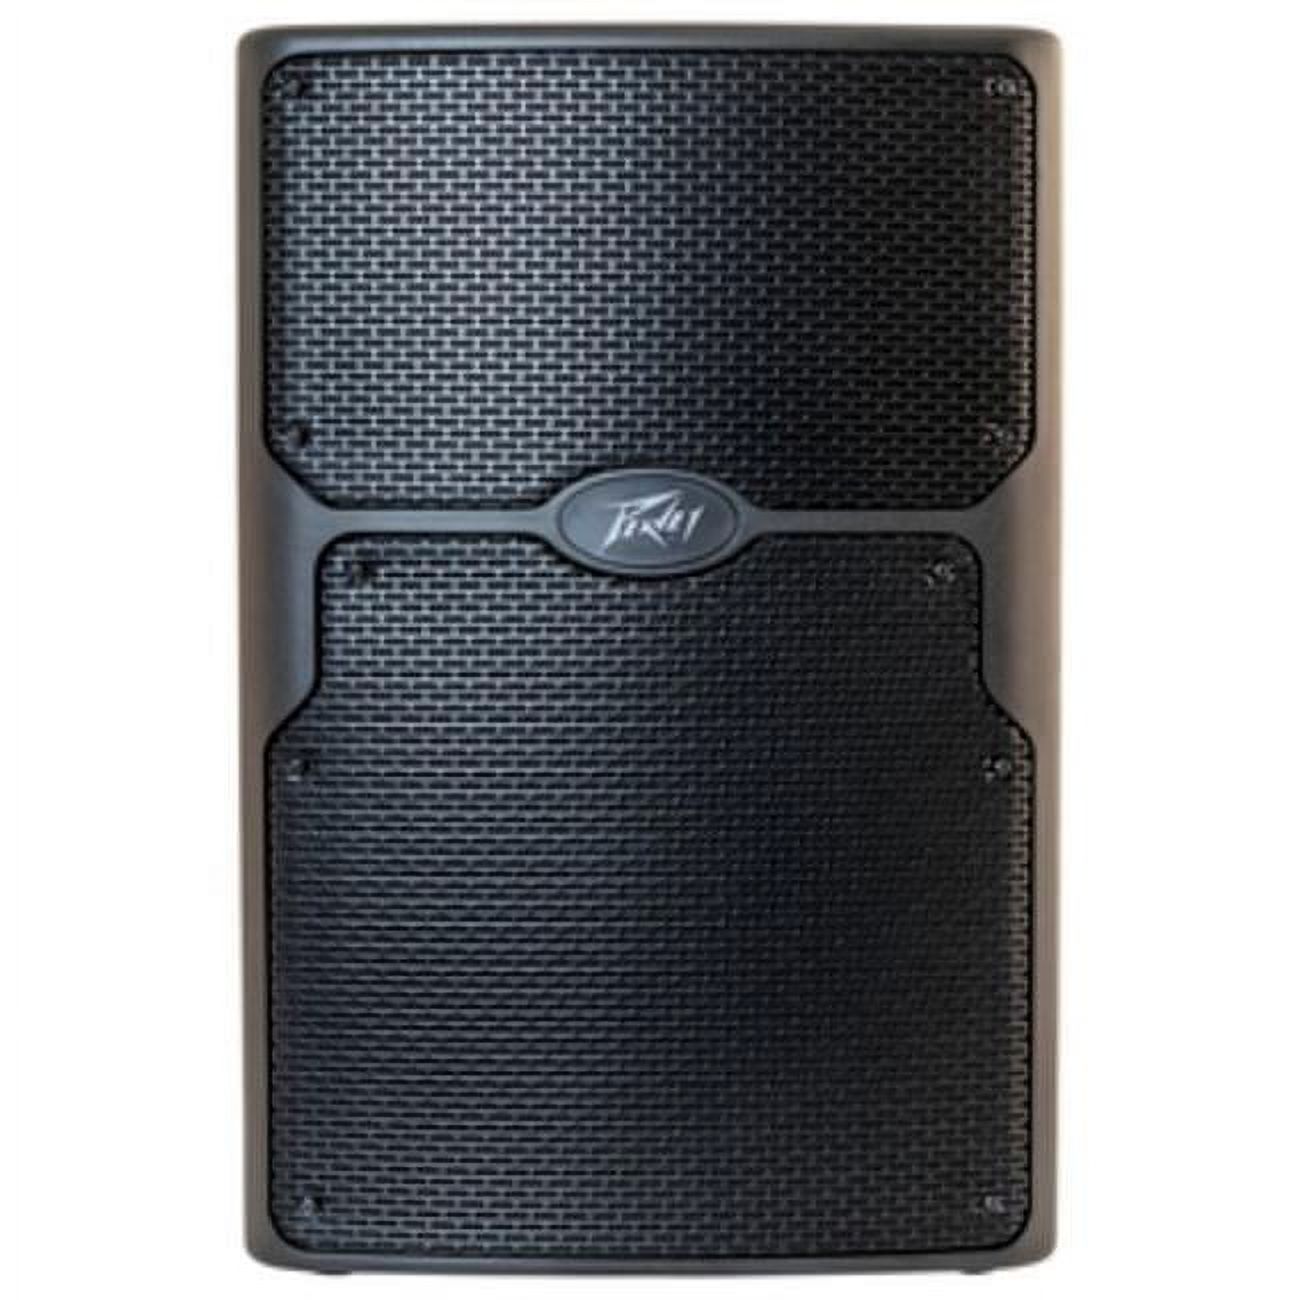 Peavey PVXP12BLUETOOTH 12 in. PVXp 12 Bluetooth 980W Powered Loudspeaker - image 1 of 5